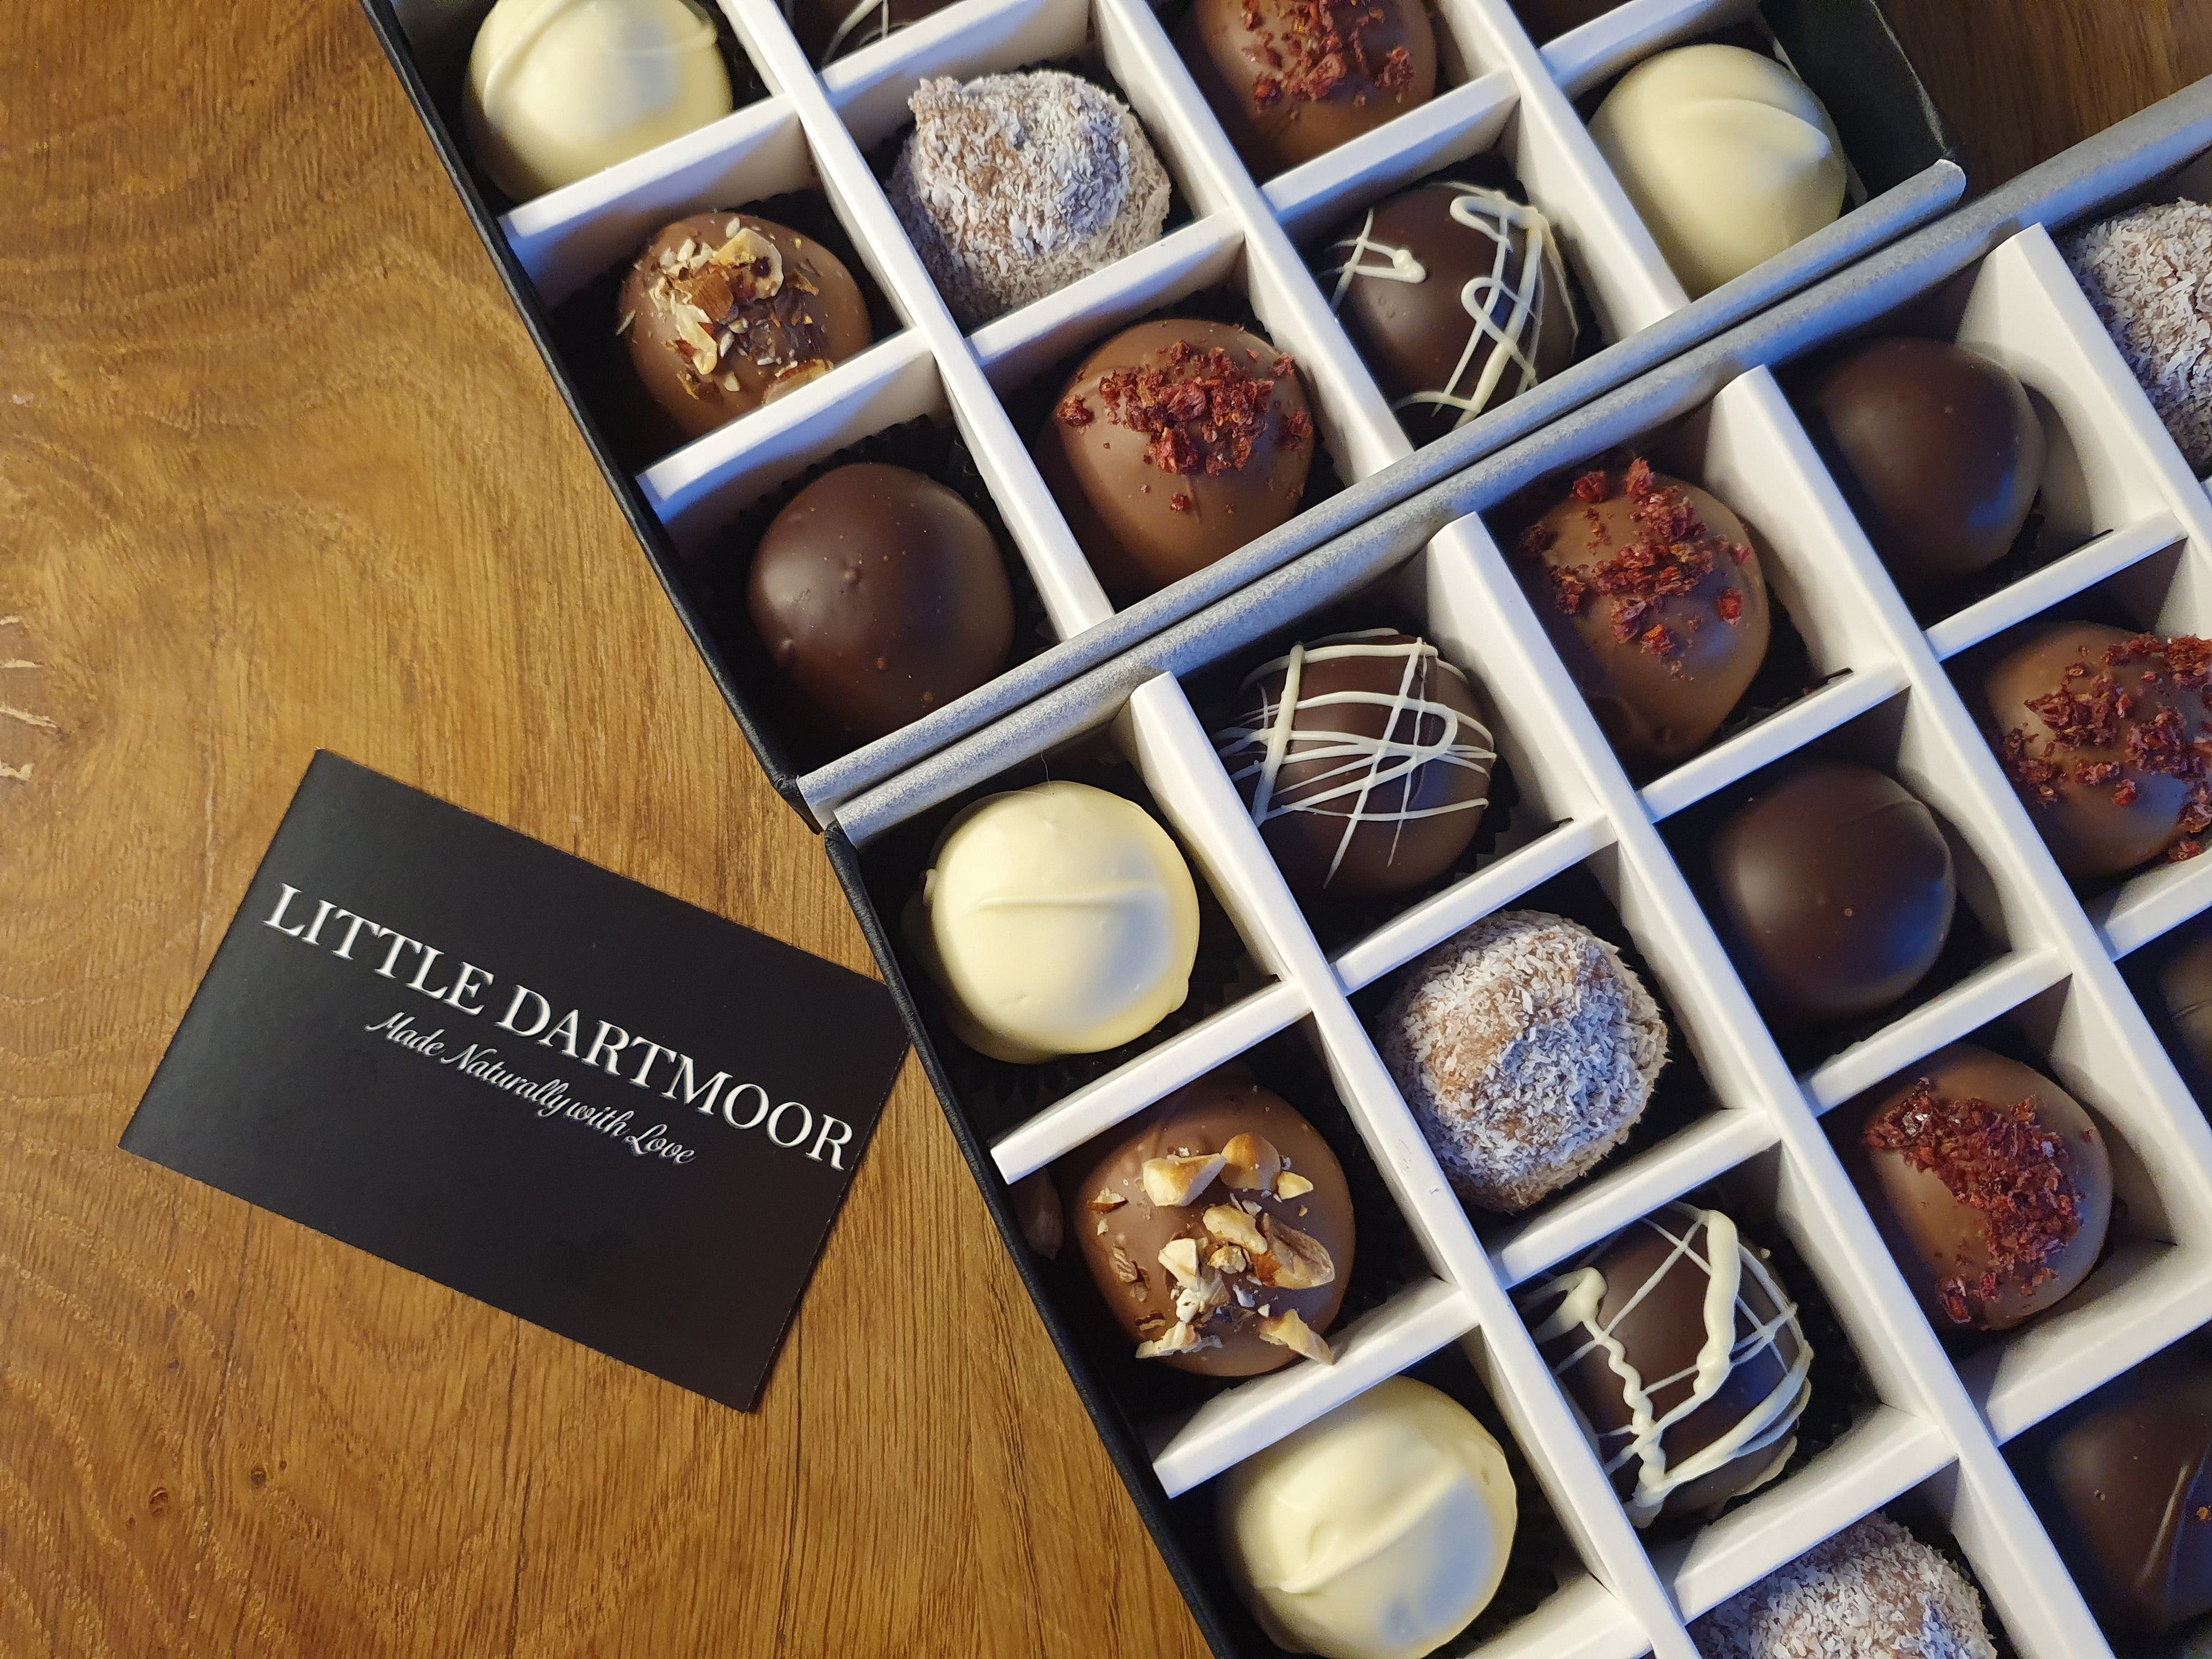 classic collection chocolate truffles in a luxury gift box with Little Dartmoor business card